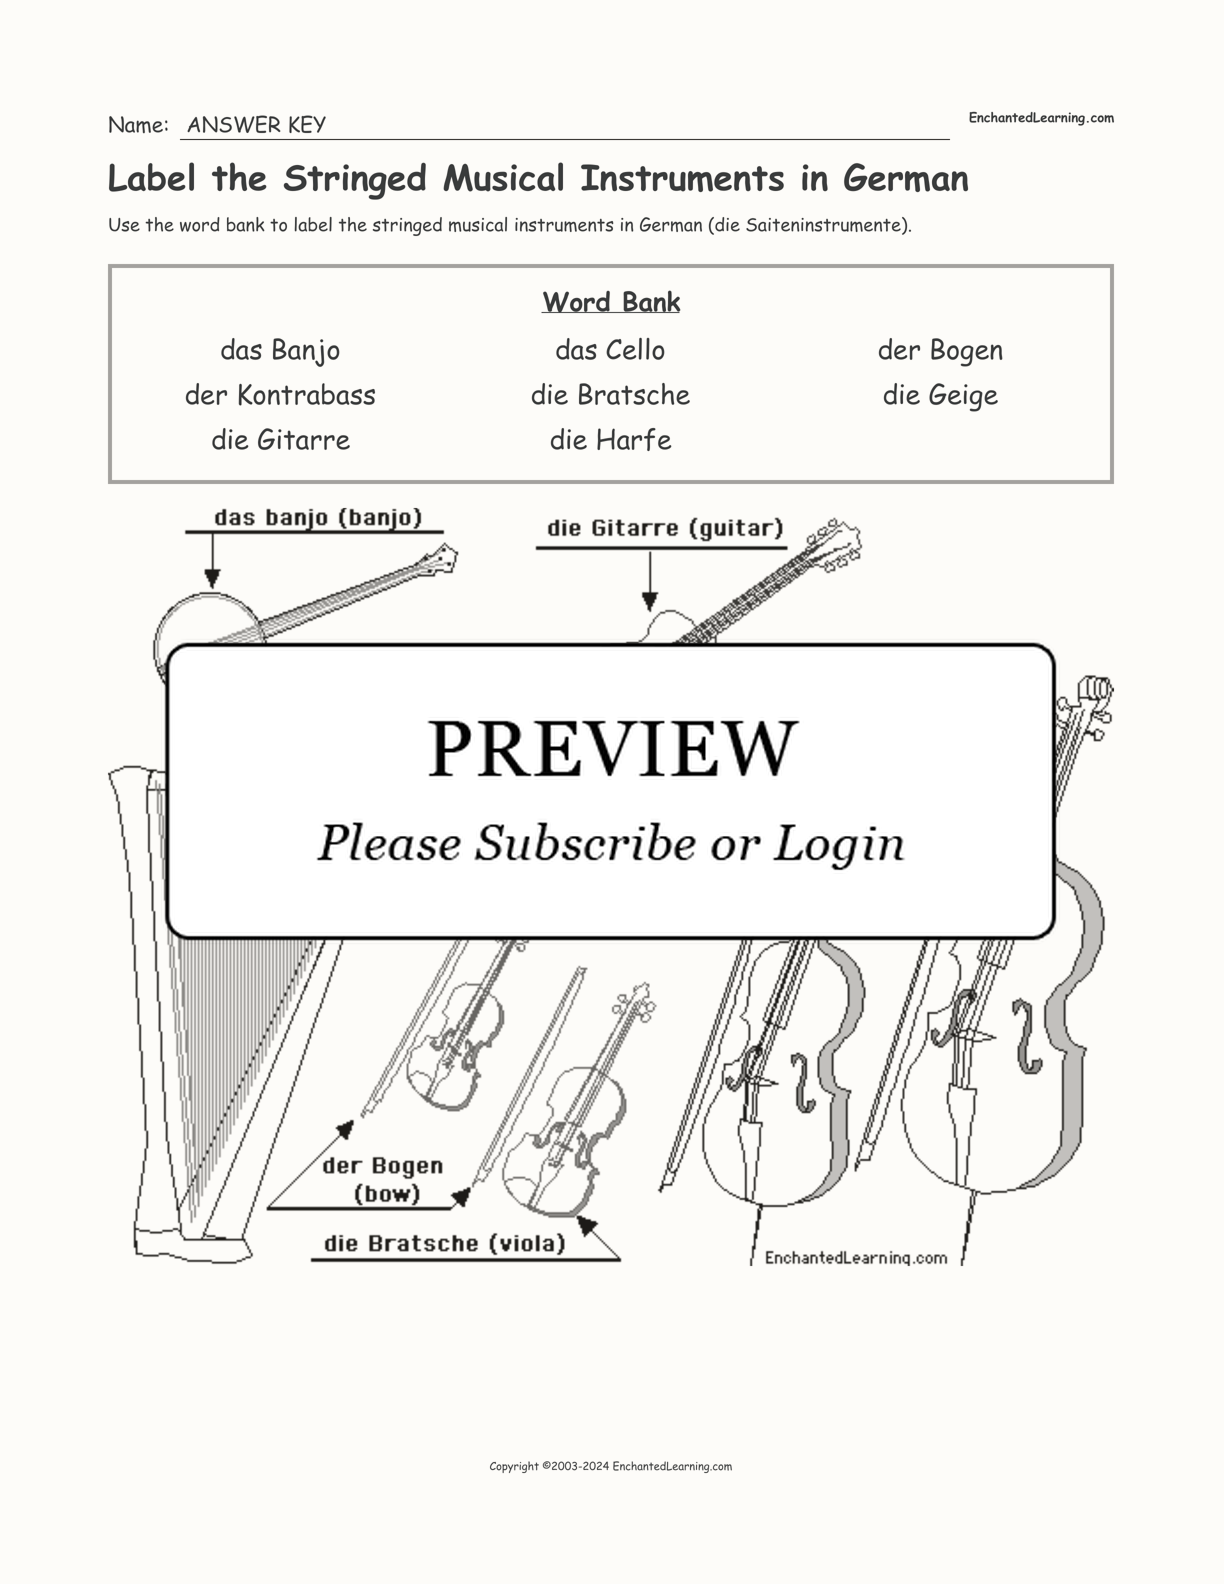 Label the Stringed Musical Instruments in German interactive worksheet page 2